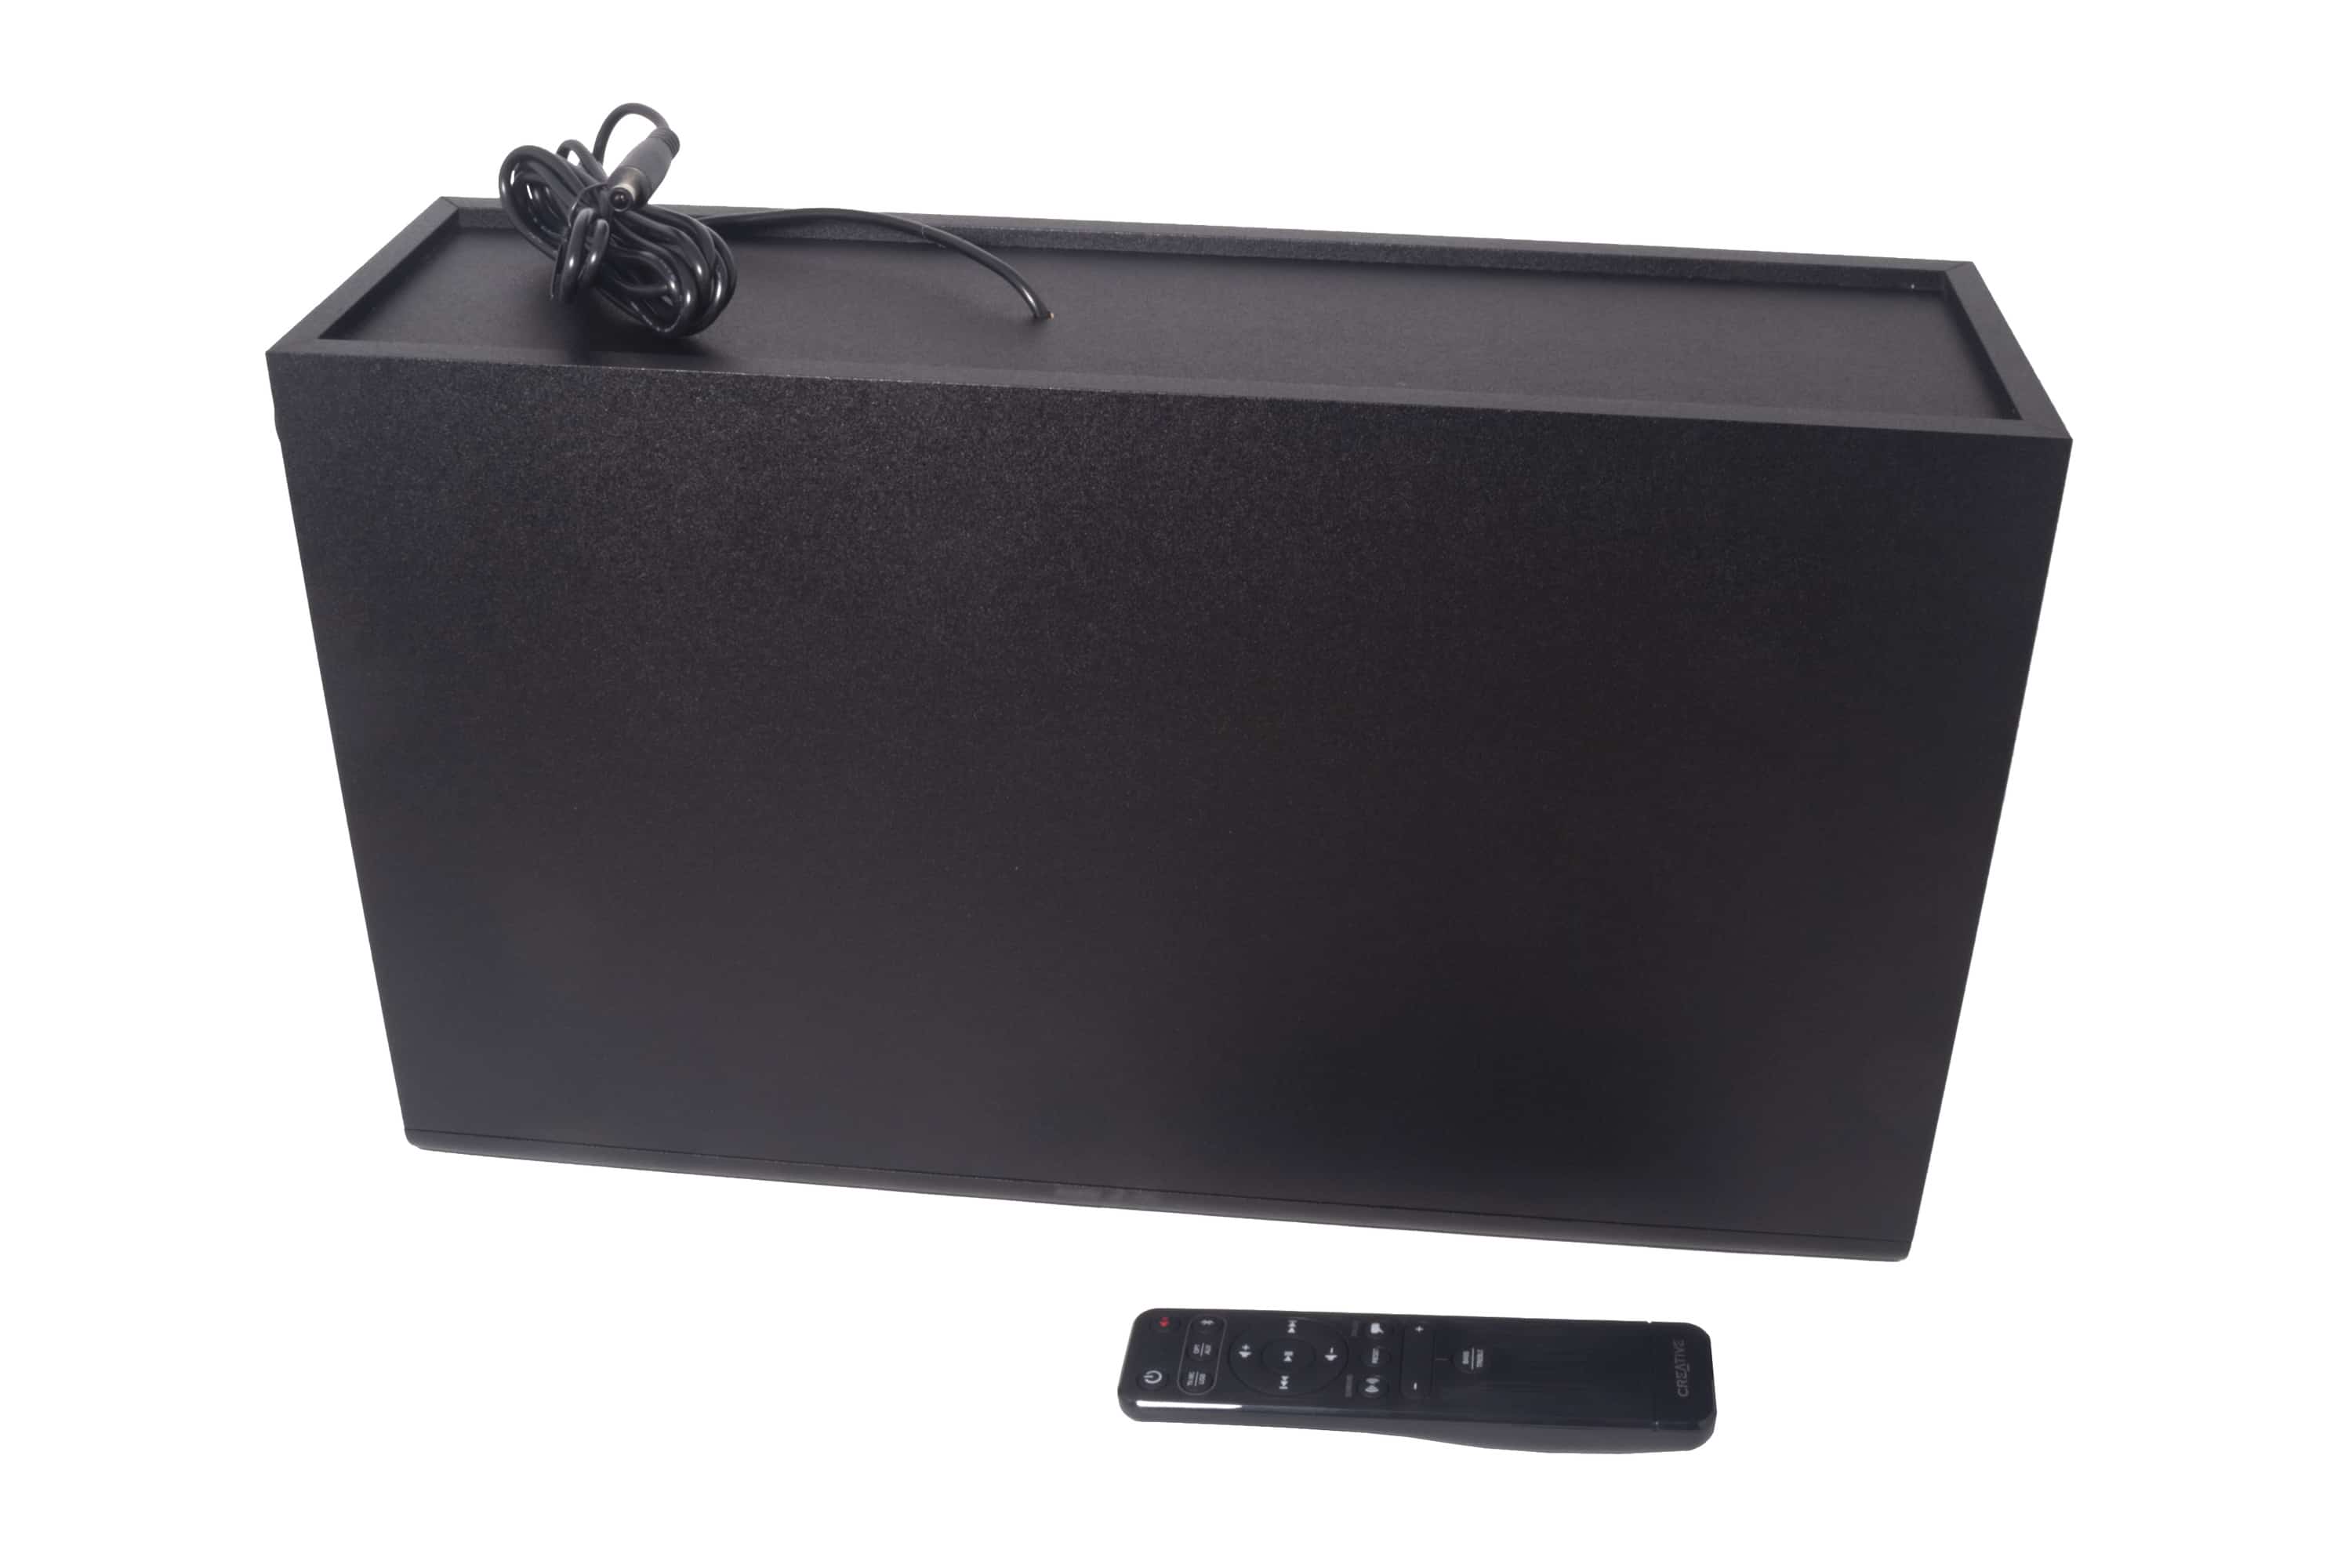 Stage - and test 2.1 in subwoofer soundbar V2 Creative from